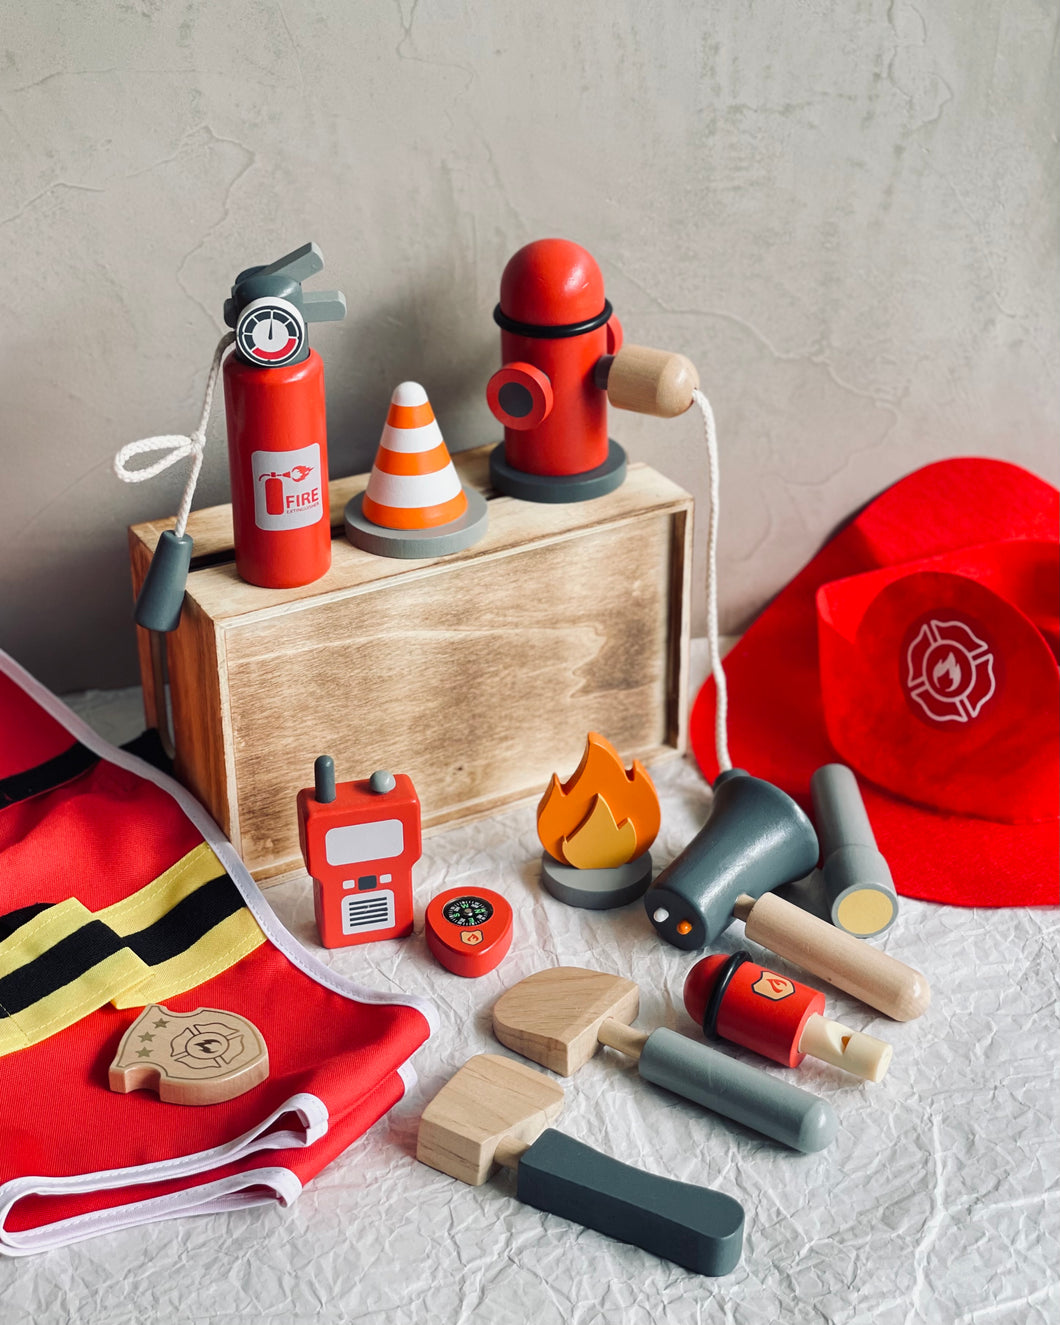 Firefighter Play Props Set